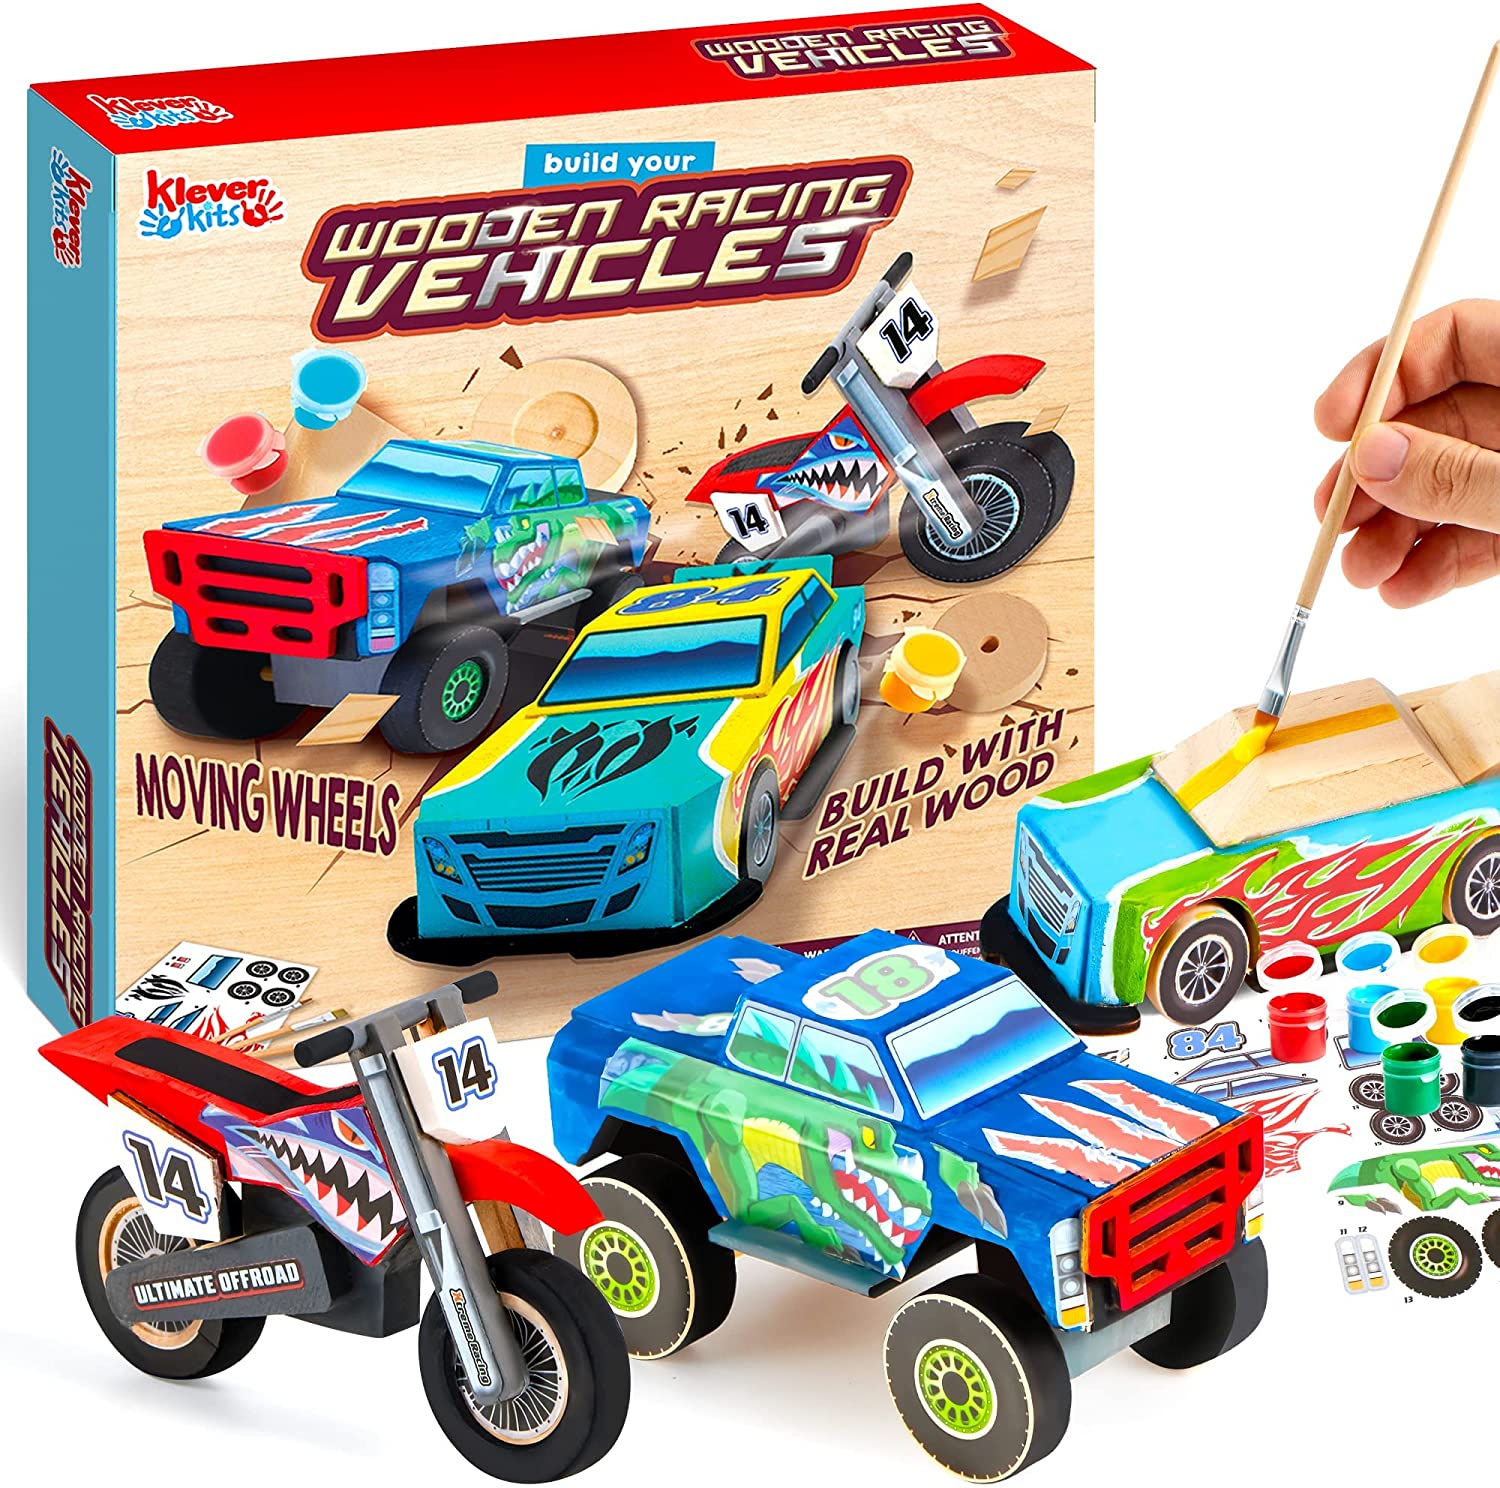 Klever Kits Kids Craft Kit, Build & Paint Your Own Wooden Race Car Art &  Craft Kit, Children's Paint Supplies with DIY Construct, Birthday Gifts for